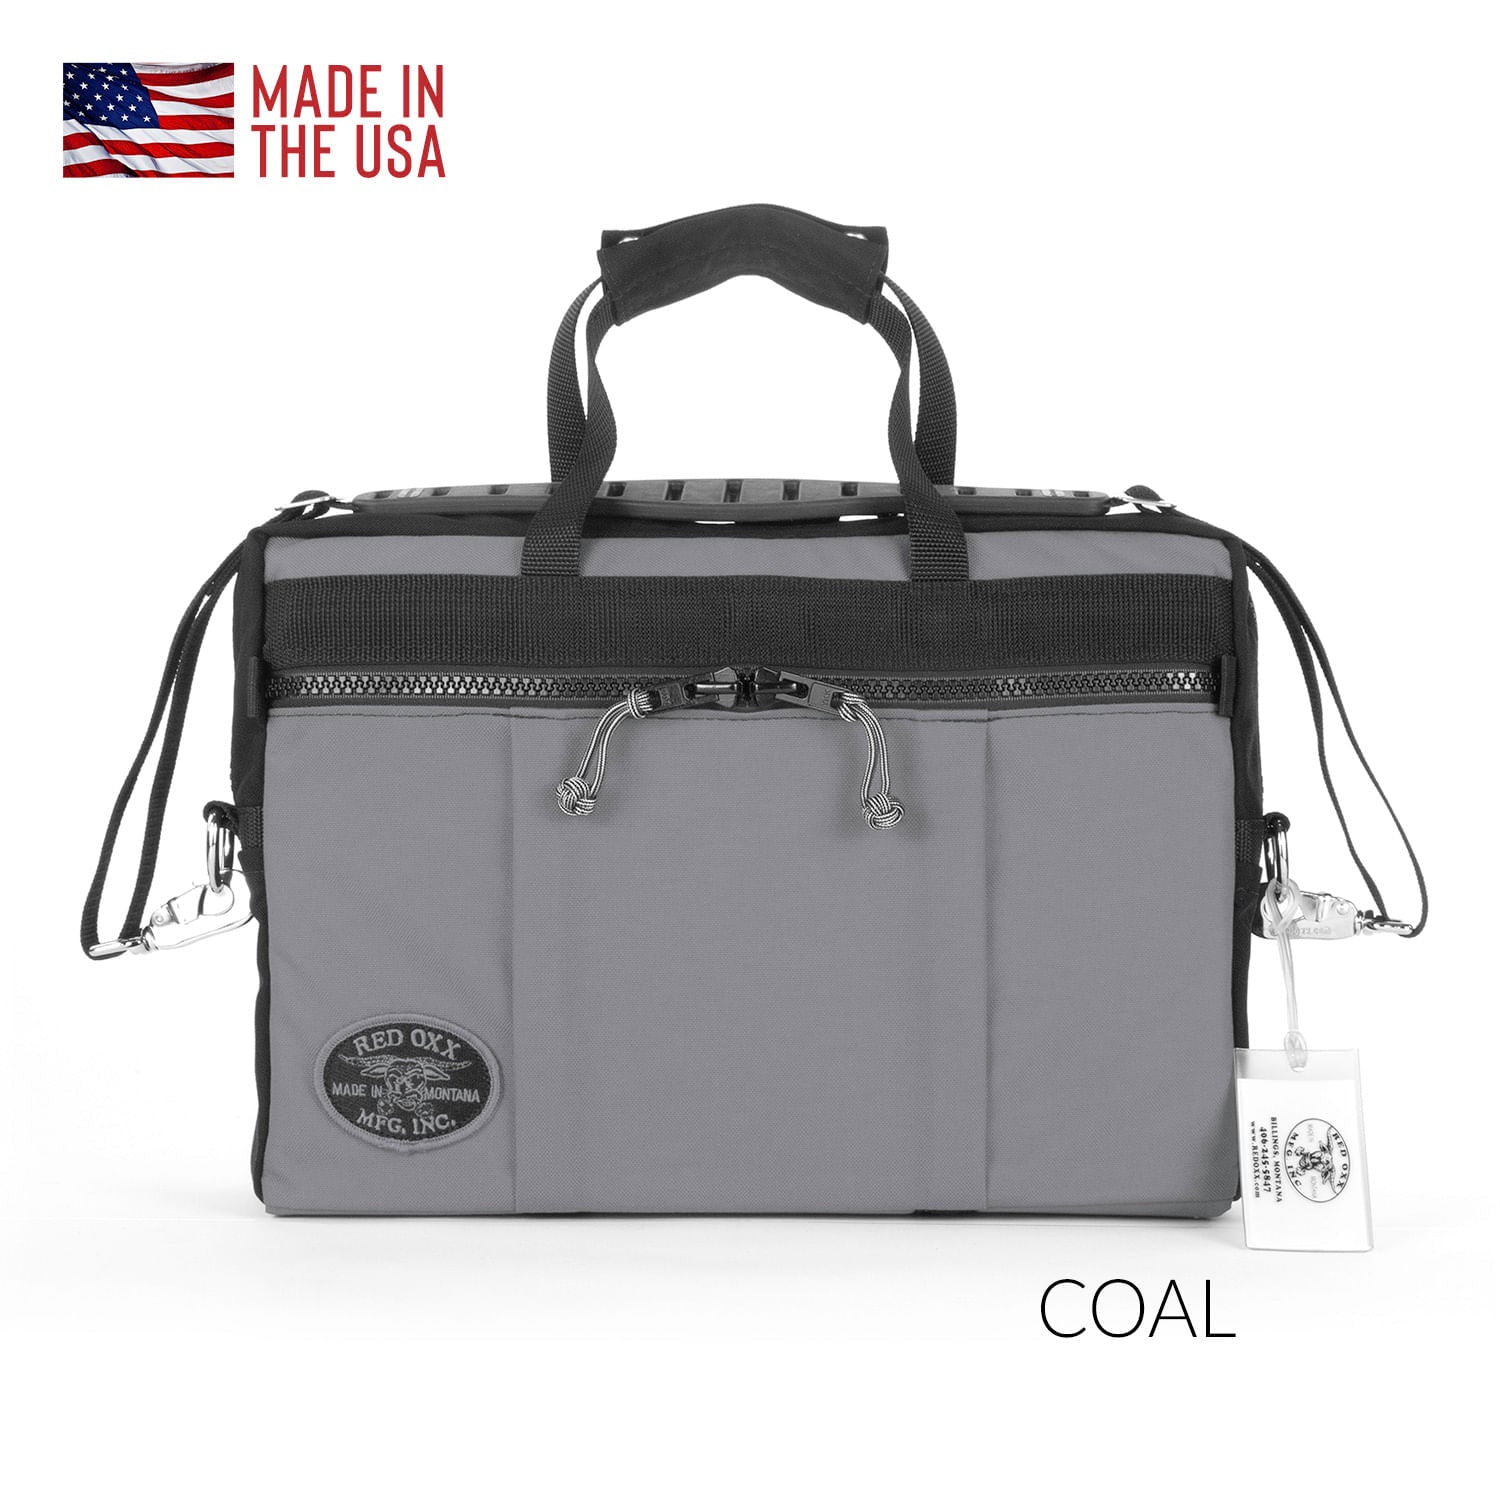 CPA briefcase padded in Coal.